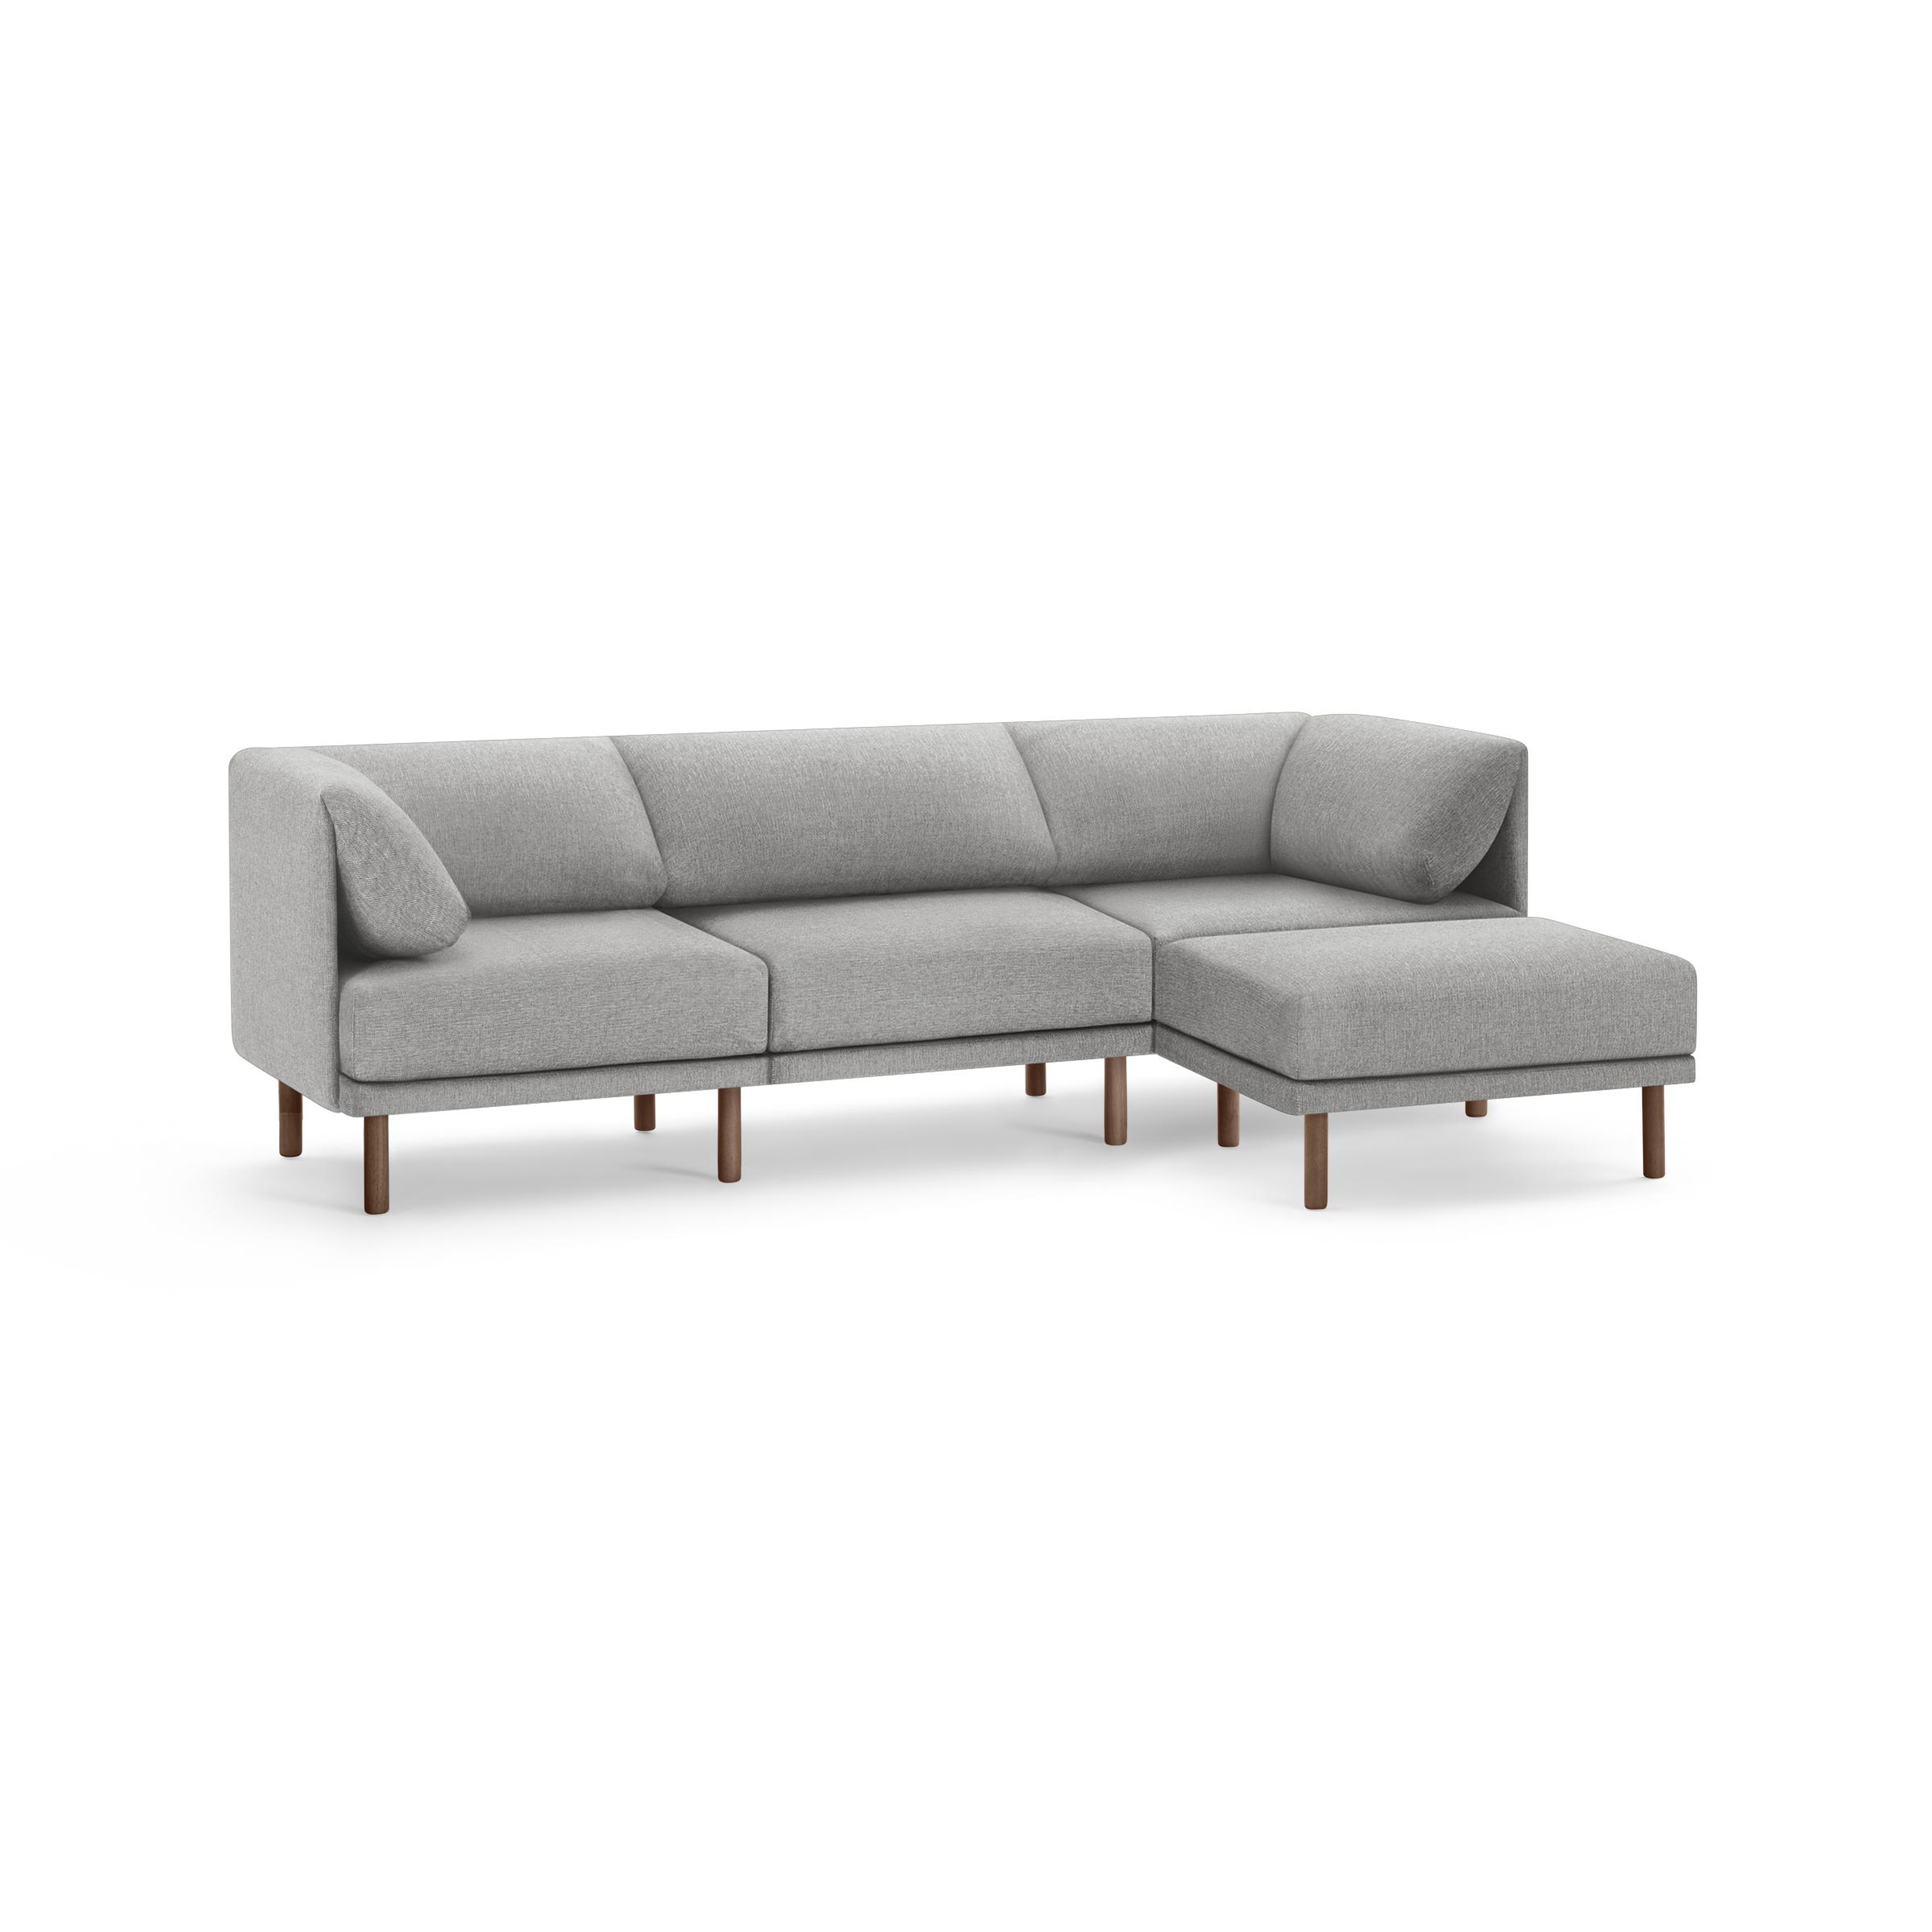 The Range 4-Piece Sectional Lounger in Stone Gray, Walnut Legs - Burrow